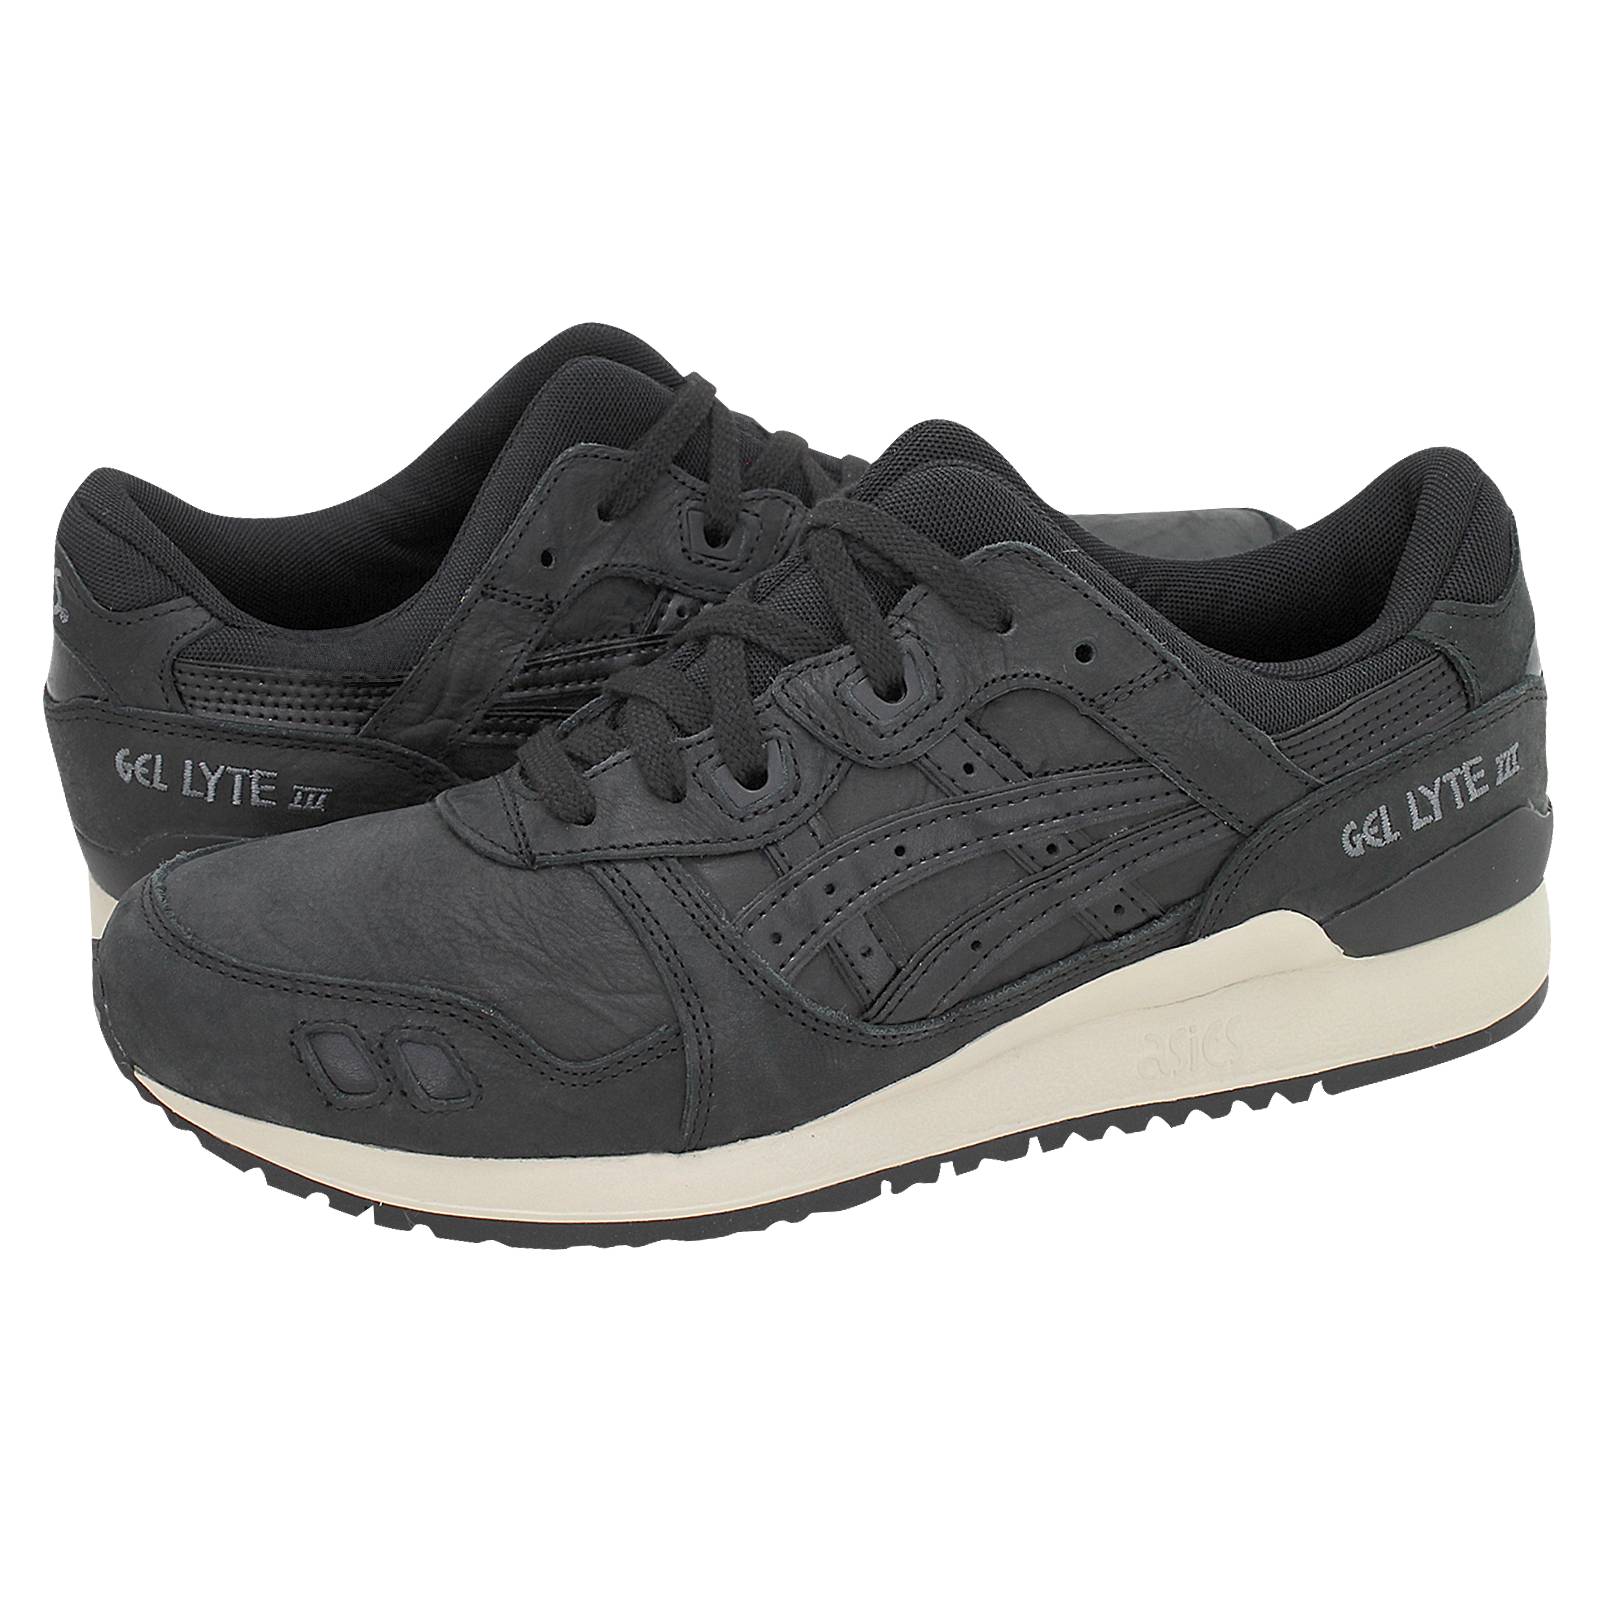 asics shoes leather